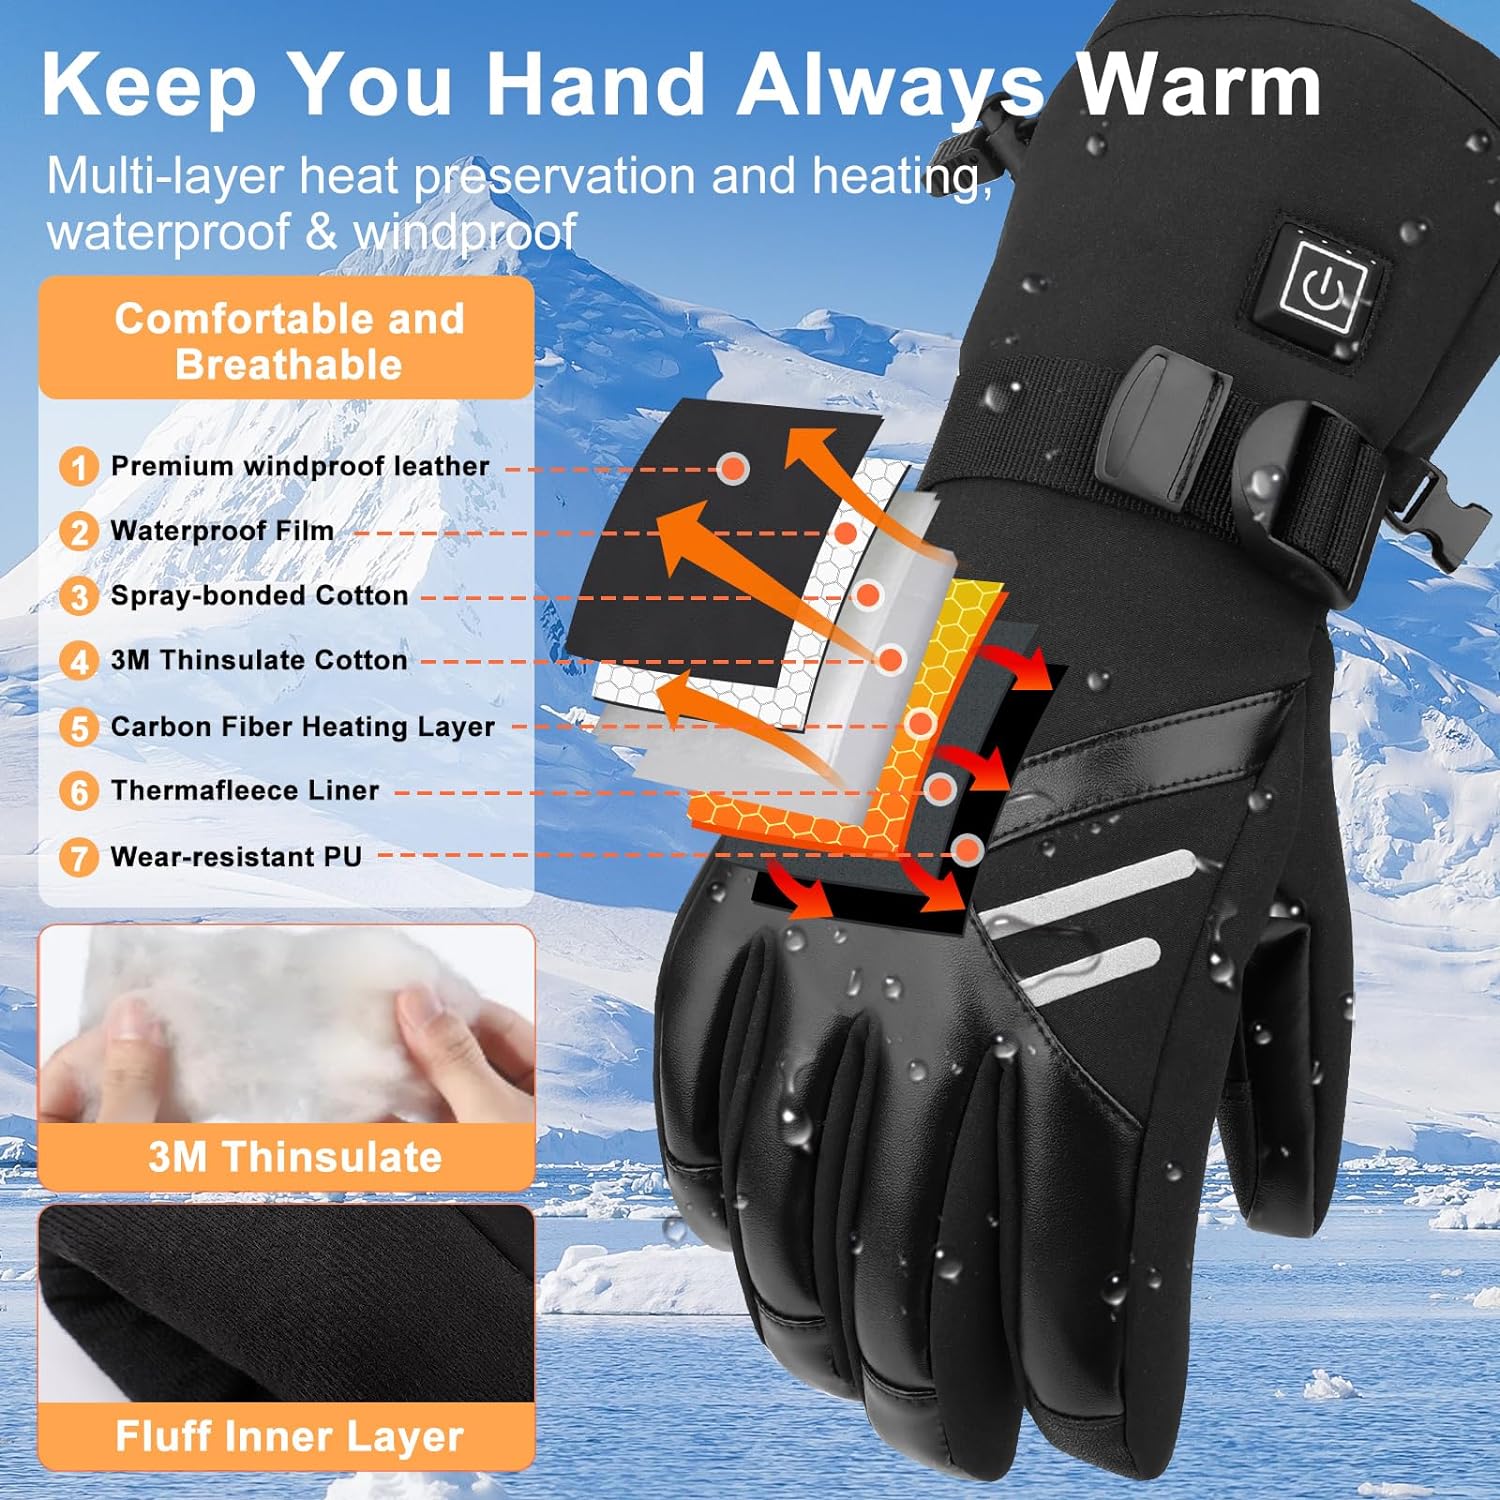 PEEH Heated Gloves for Men & Women -Electric Battery Heating Gloves Touch Screen & Waterproof Hand Warmers Gloves Washable for Skiing Hunting Ice Fishing Camping Hiking Outdoor Work